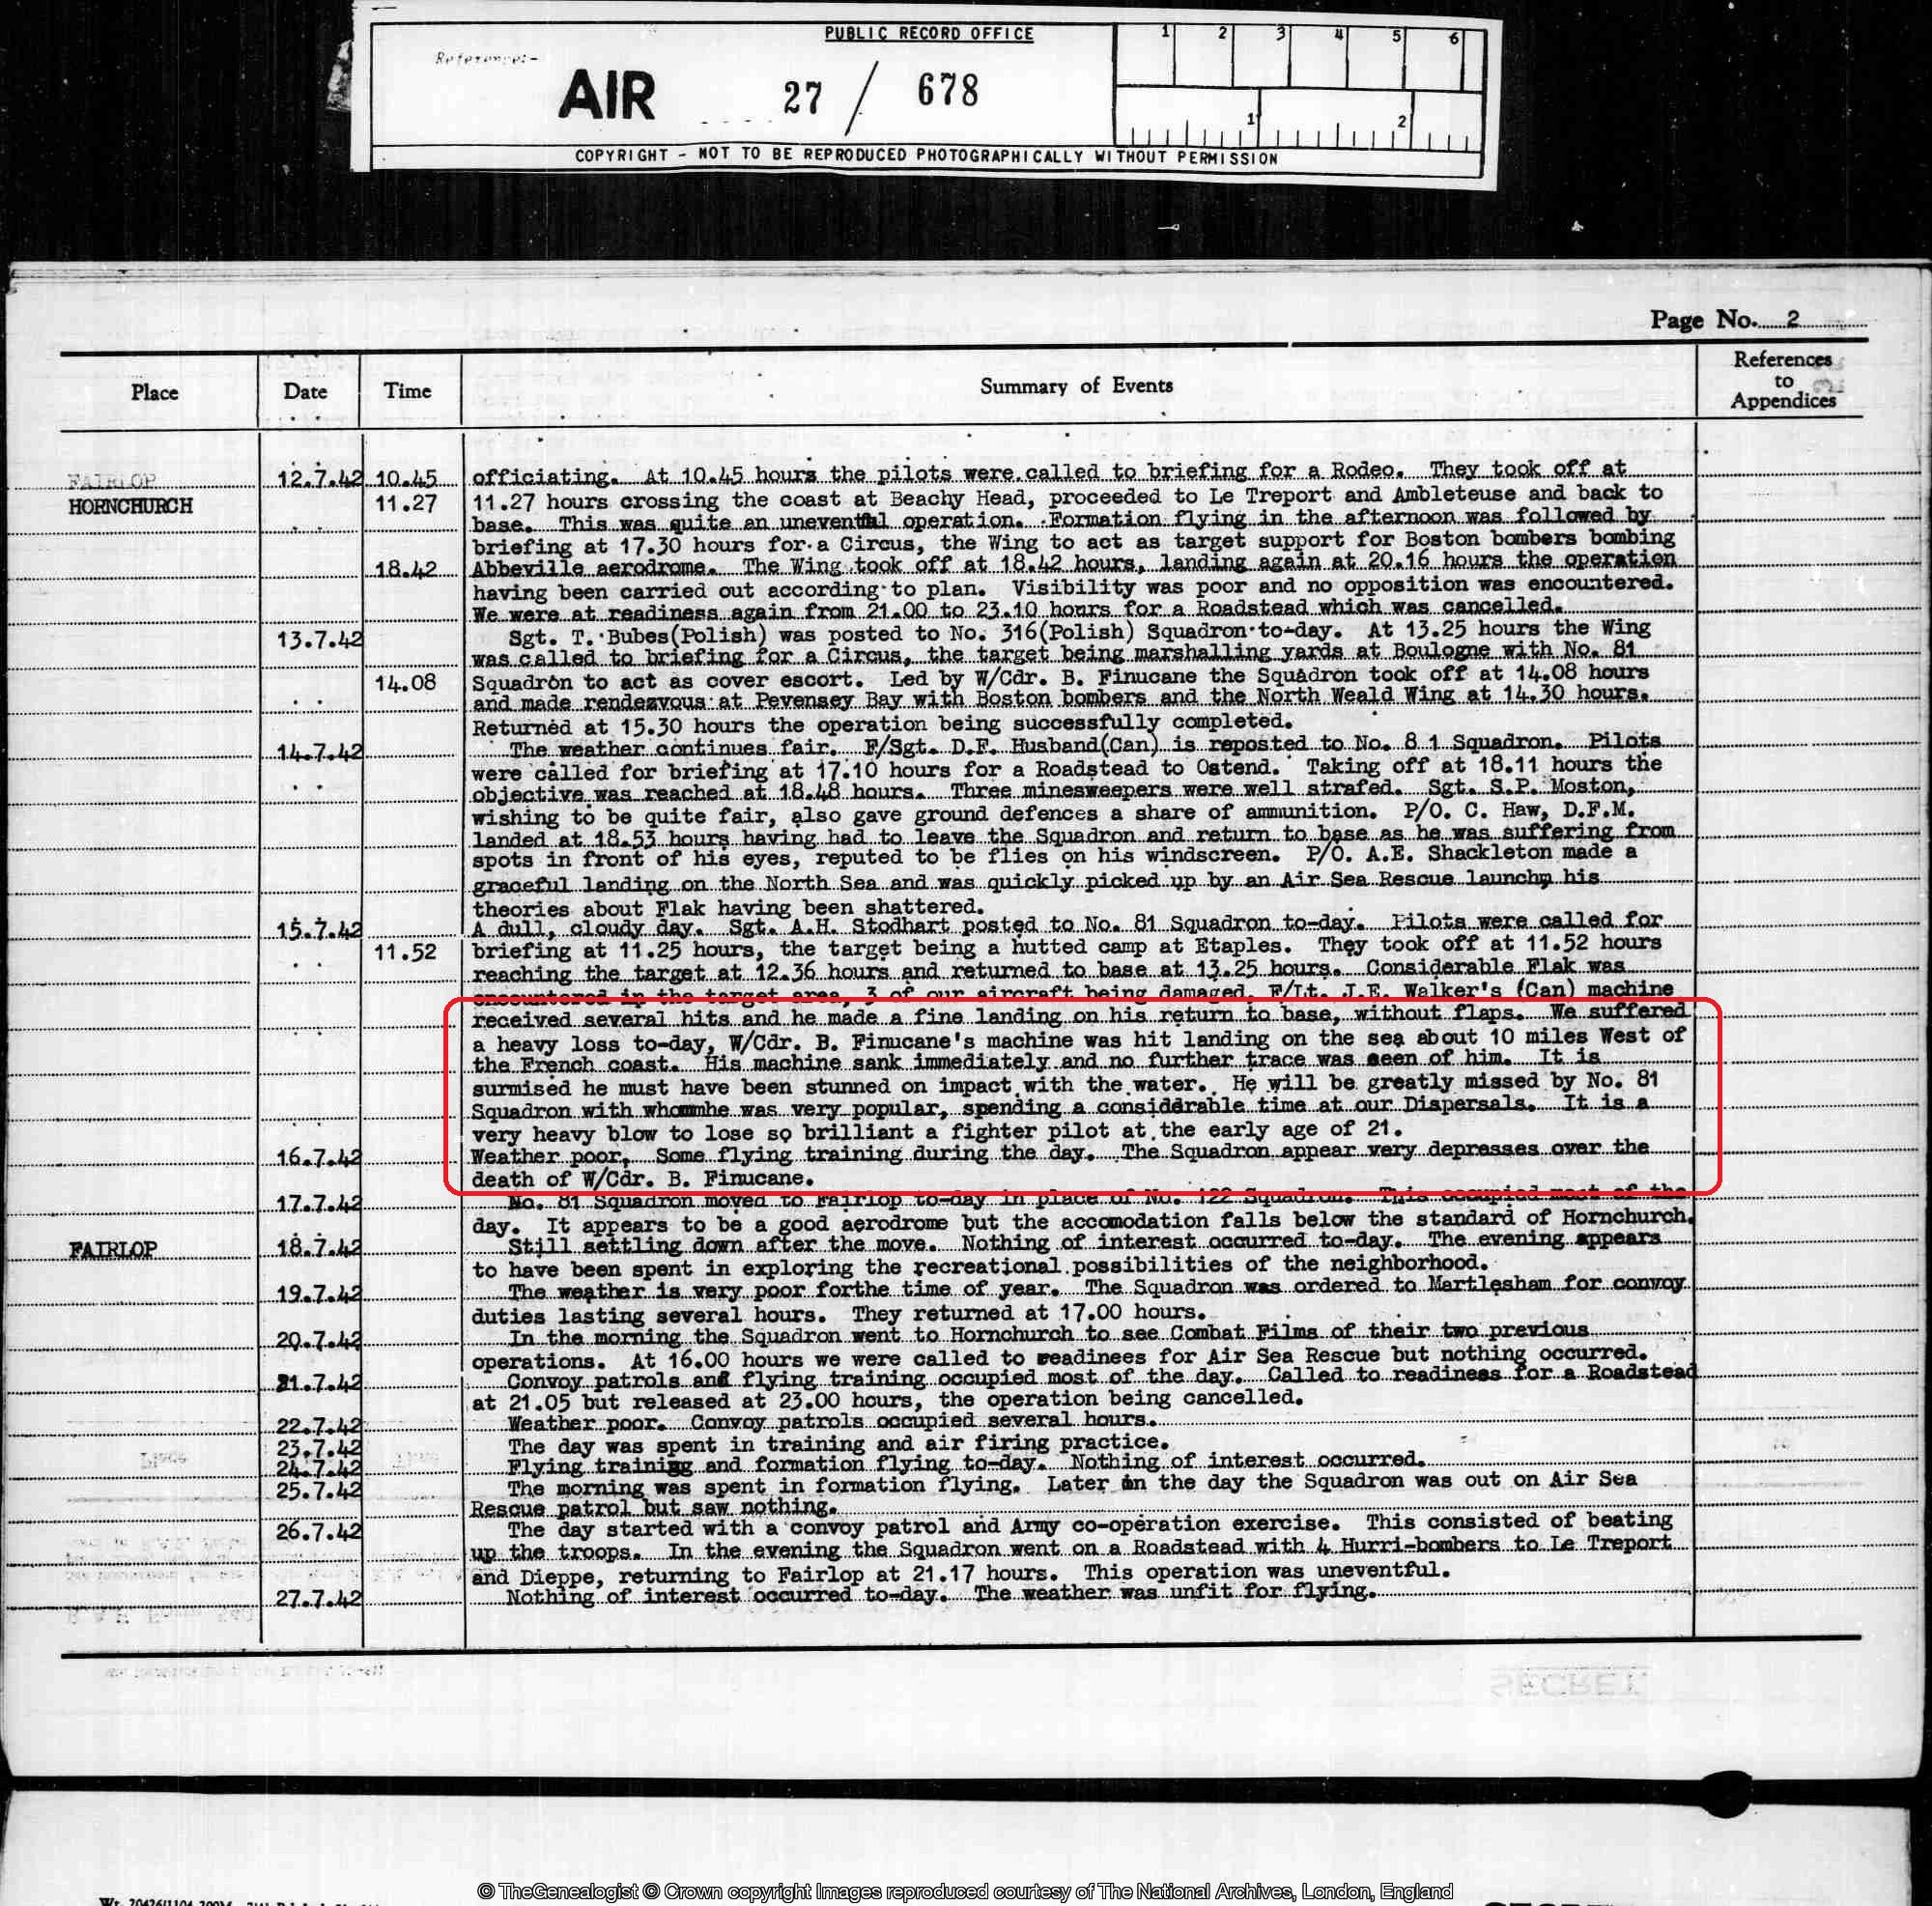 Air 27 Operations Record Book (ORB) for Finucane's squadron records his loss